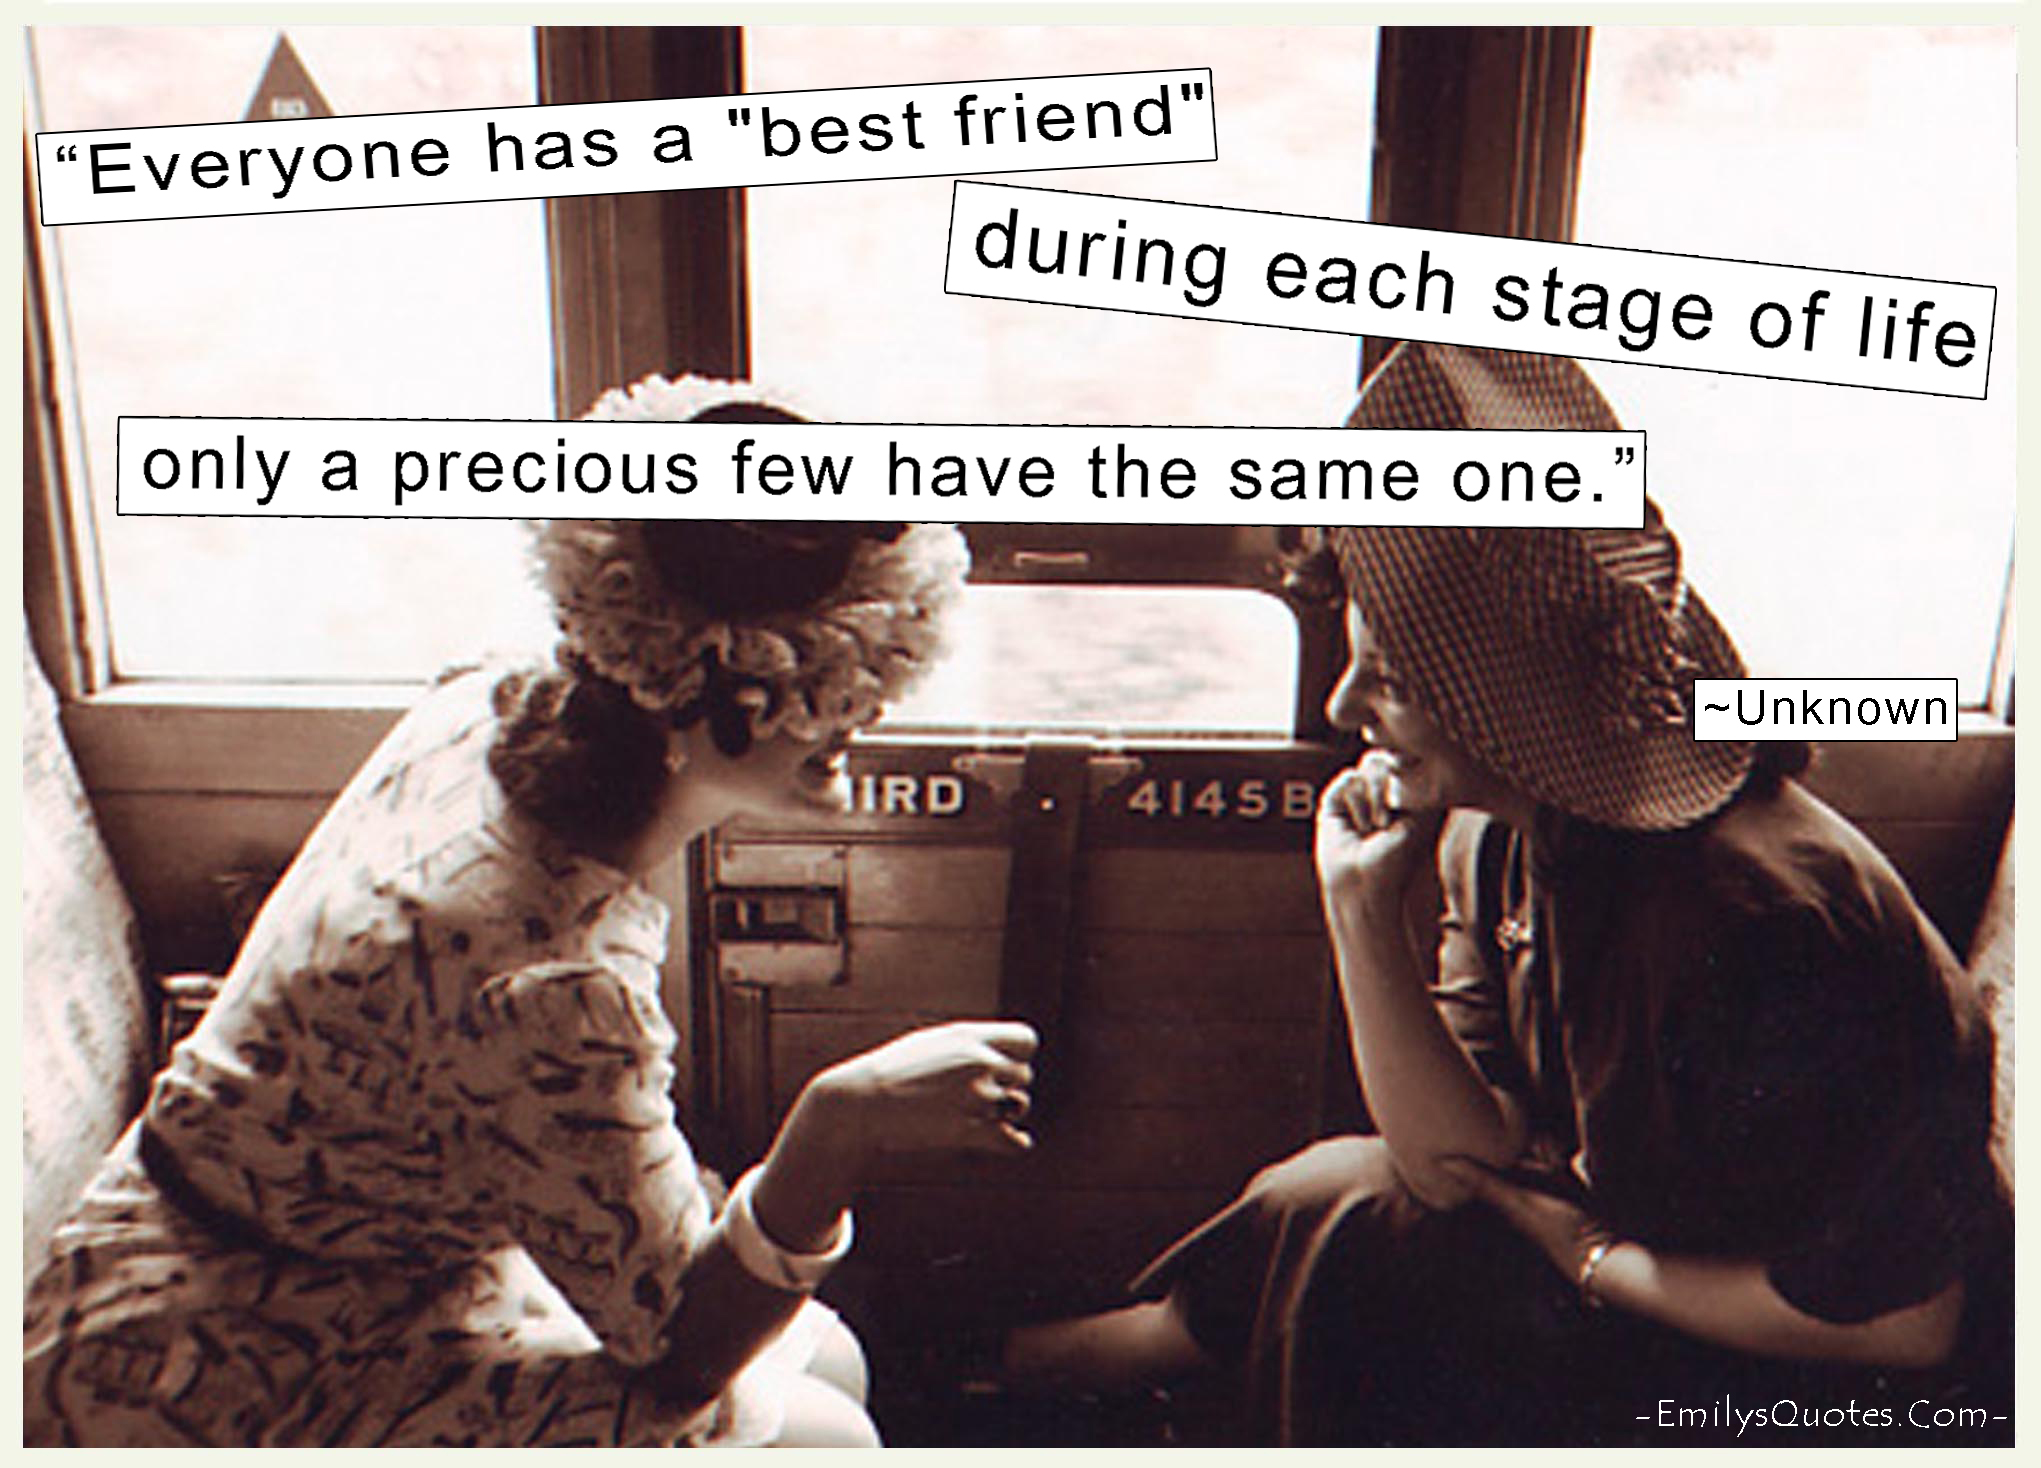 Everyone has a "best friend" during each stage of life-only a precious